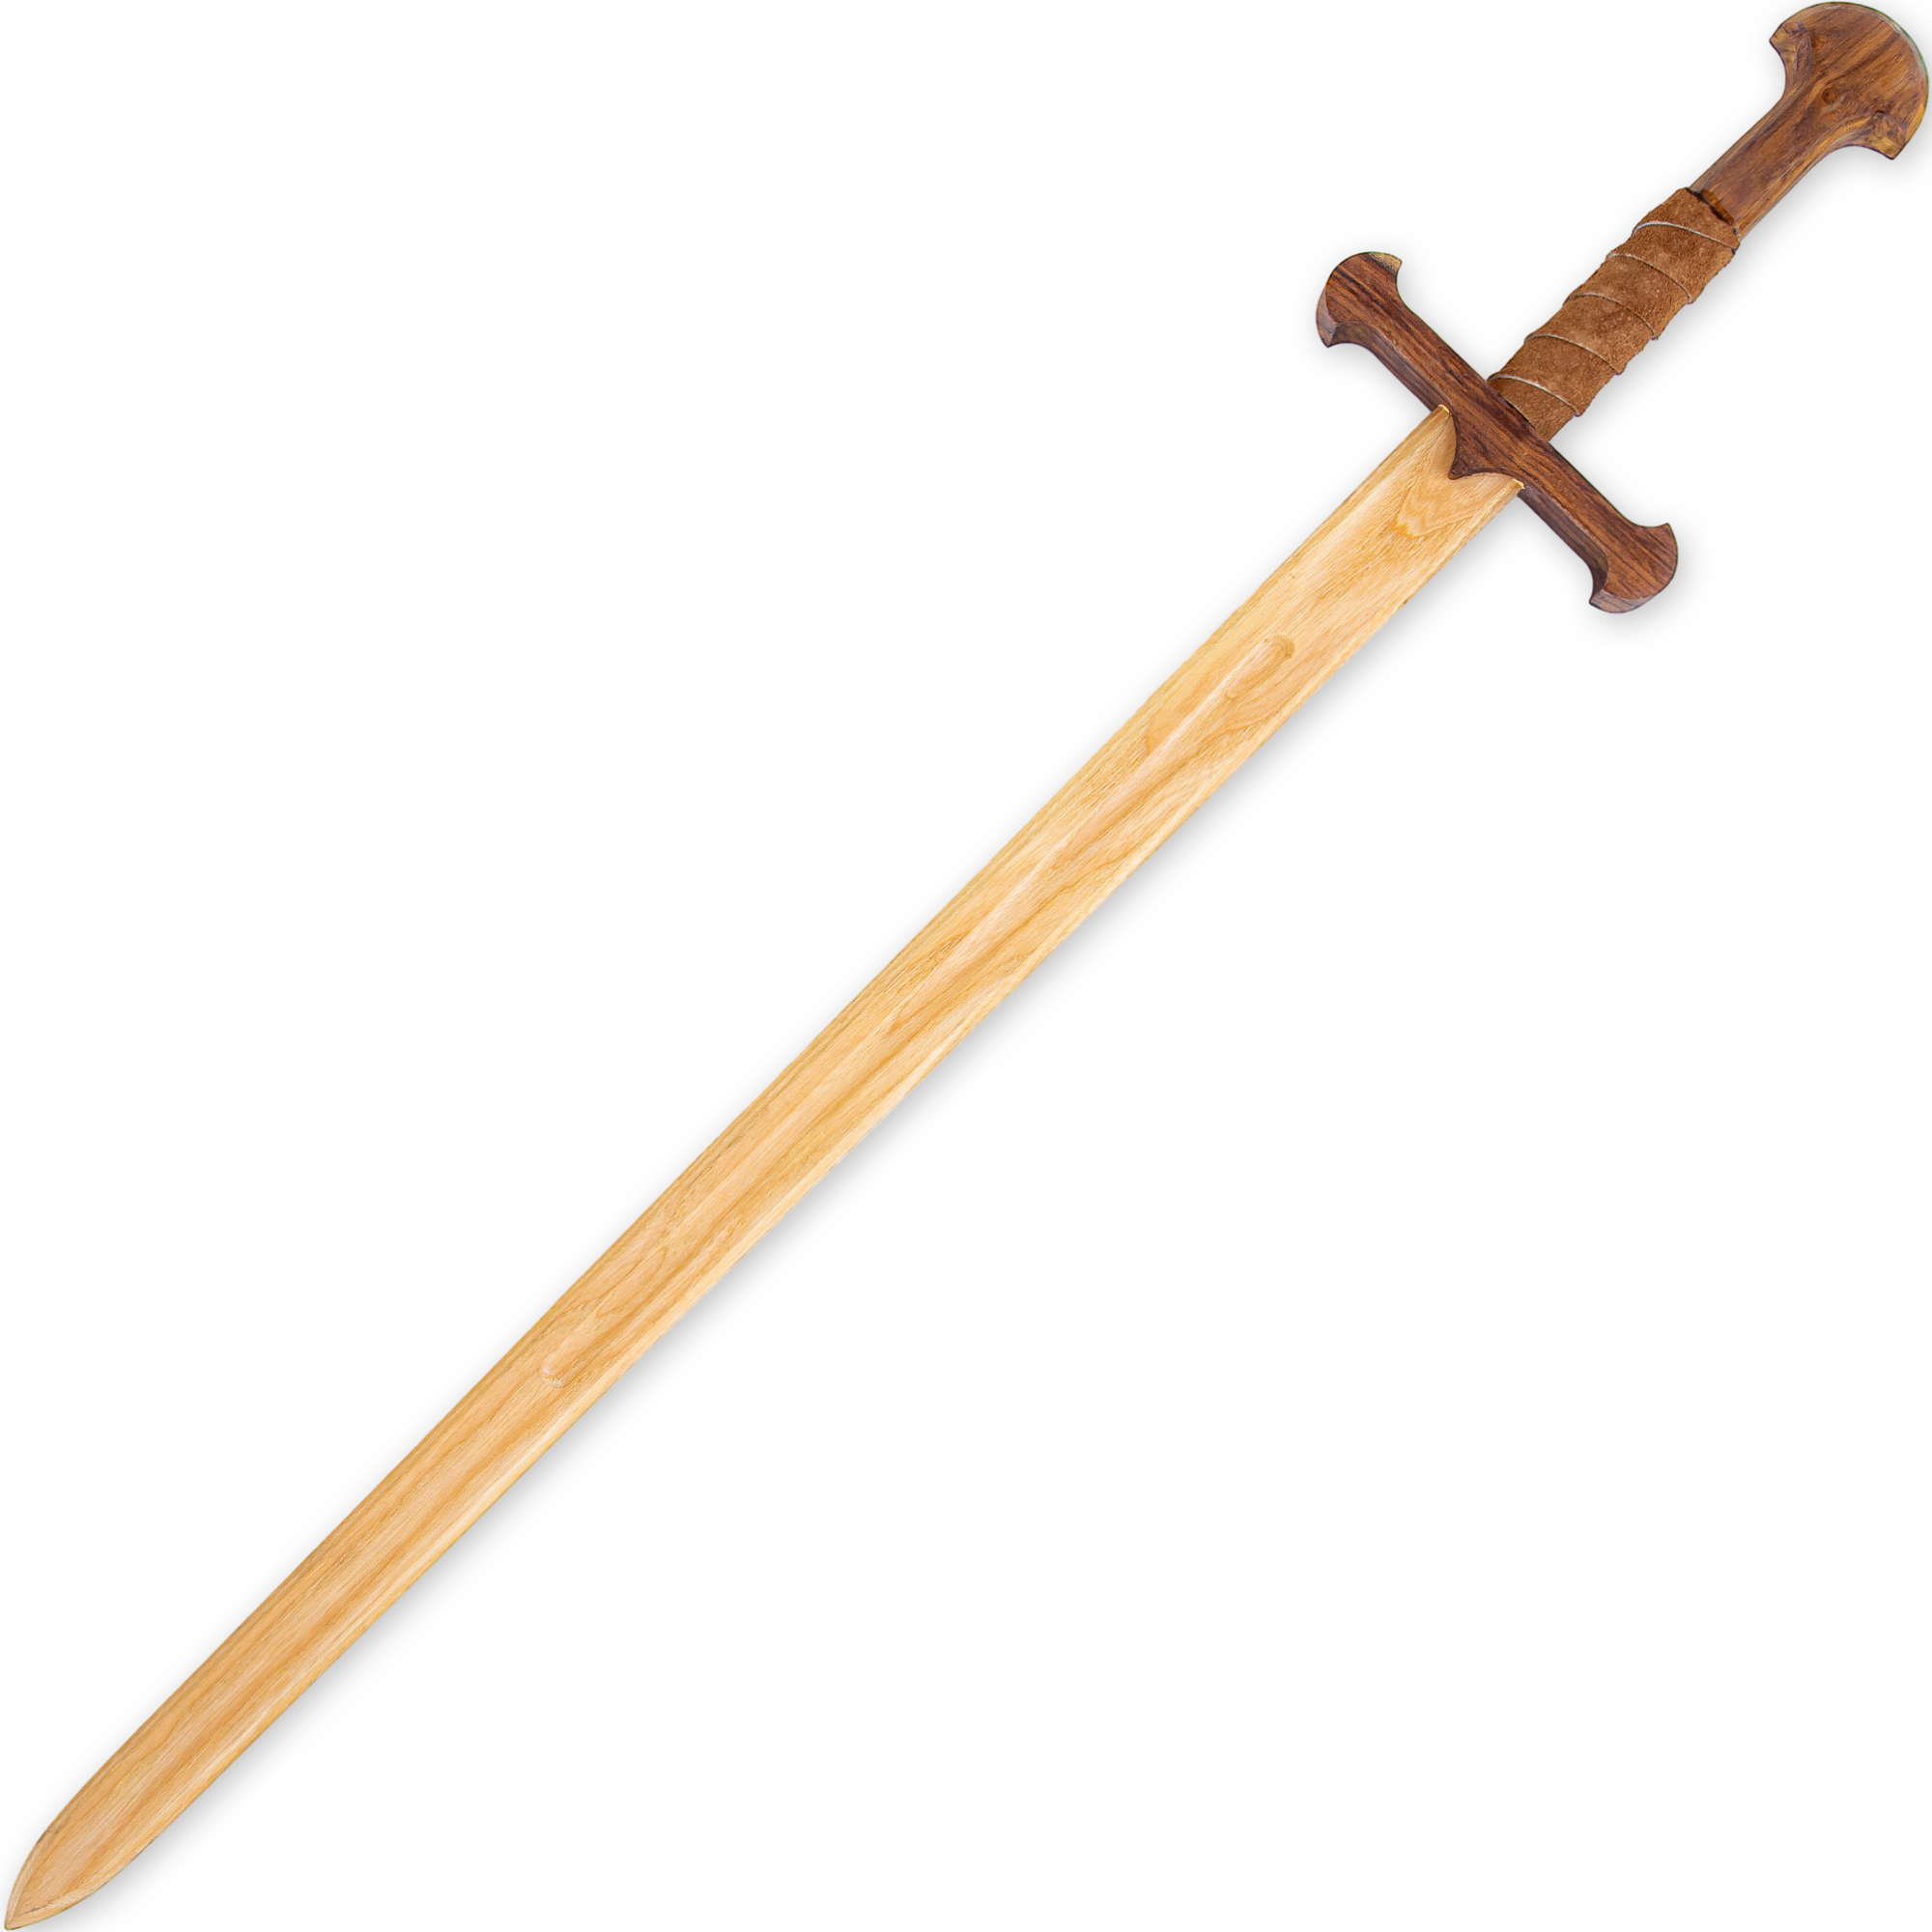 Hooved Combatant Training Practice Play Sparring Functional Medieval Inspired Templar Wooden SWORD